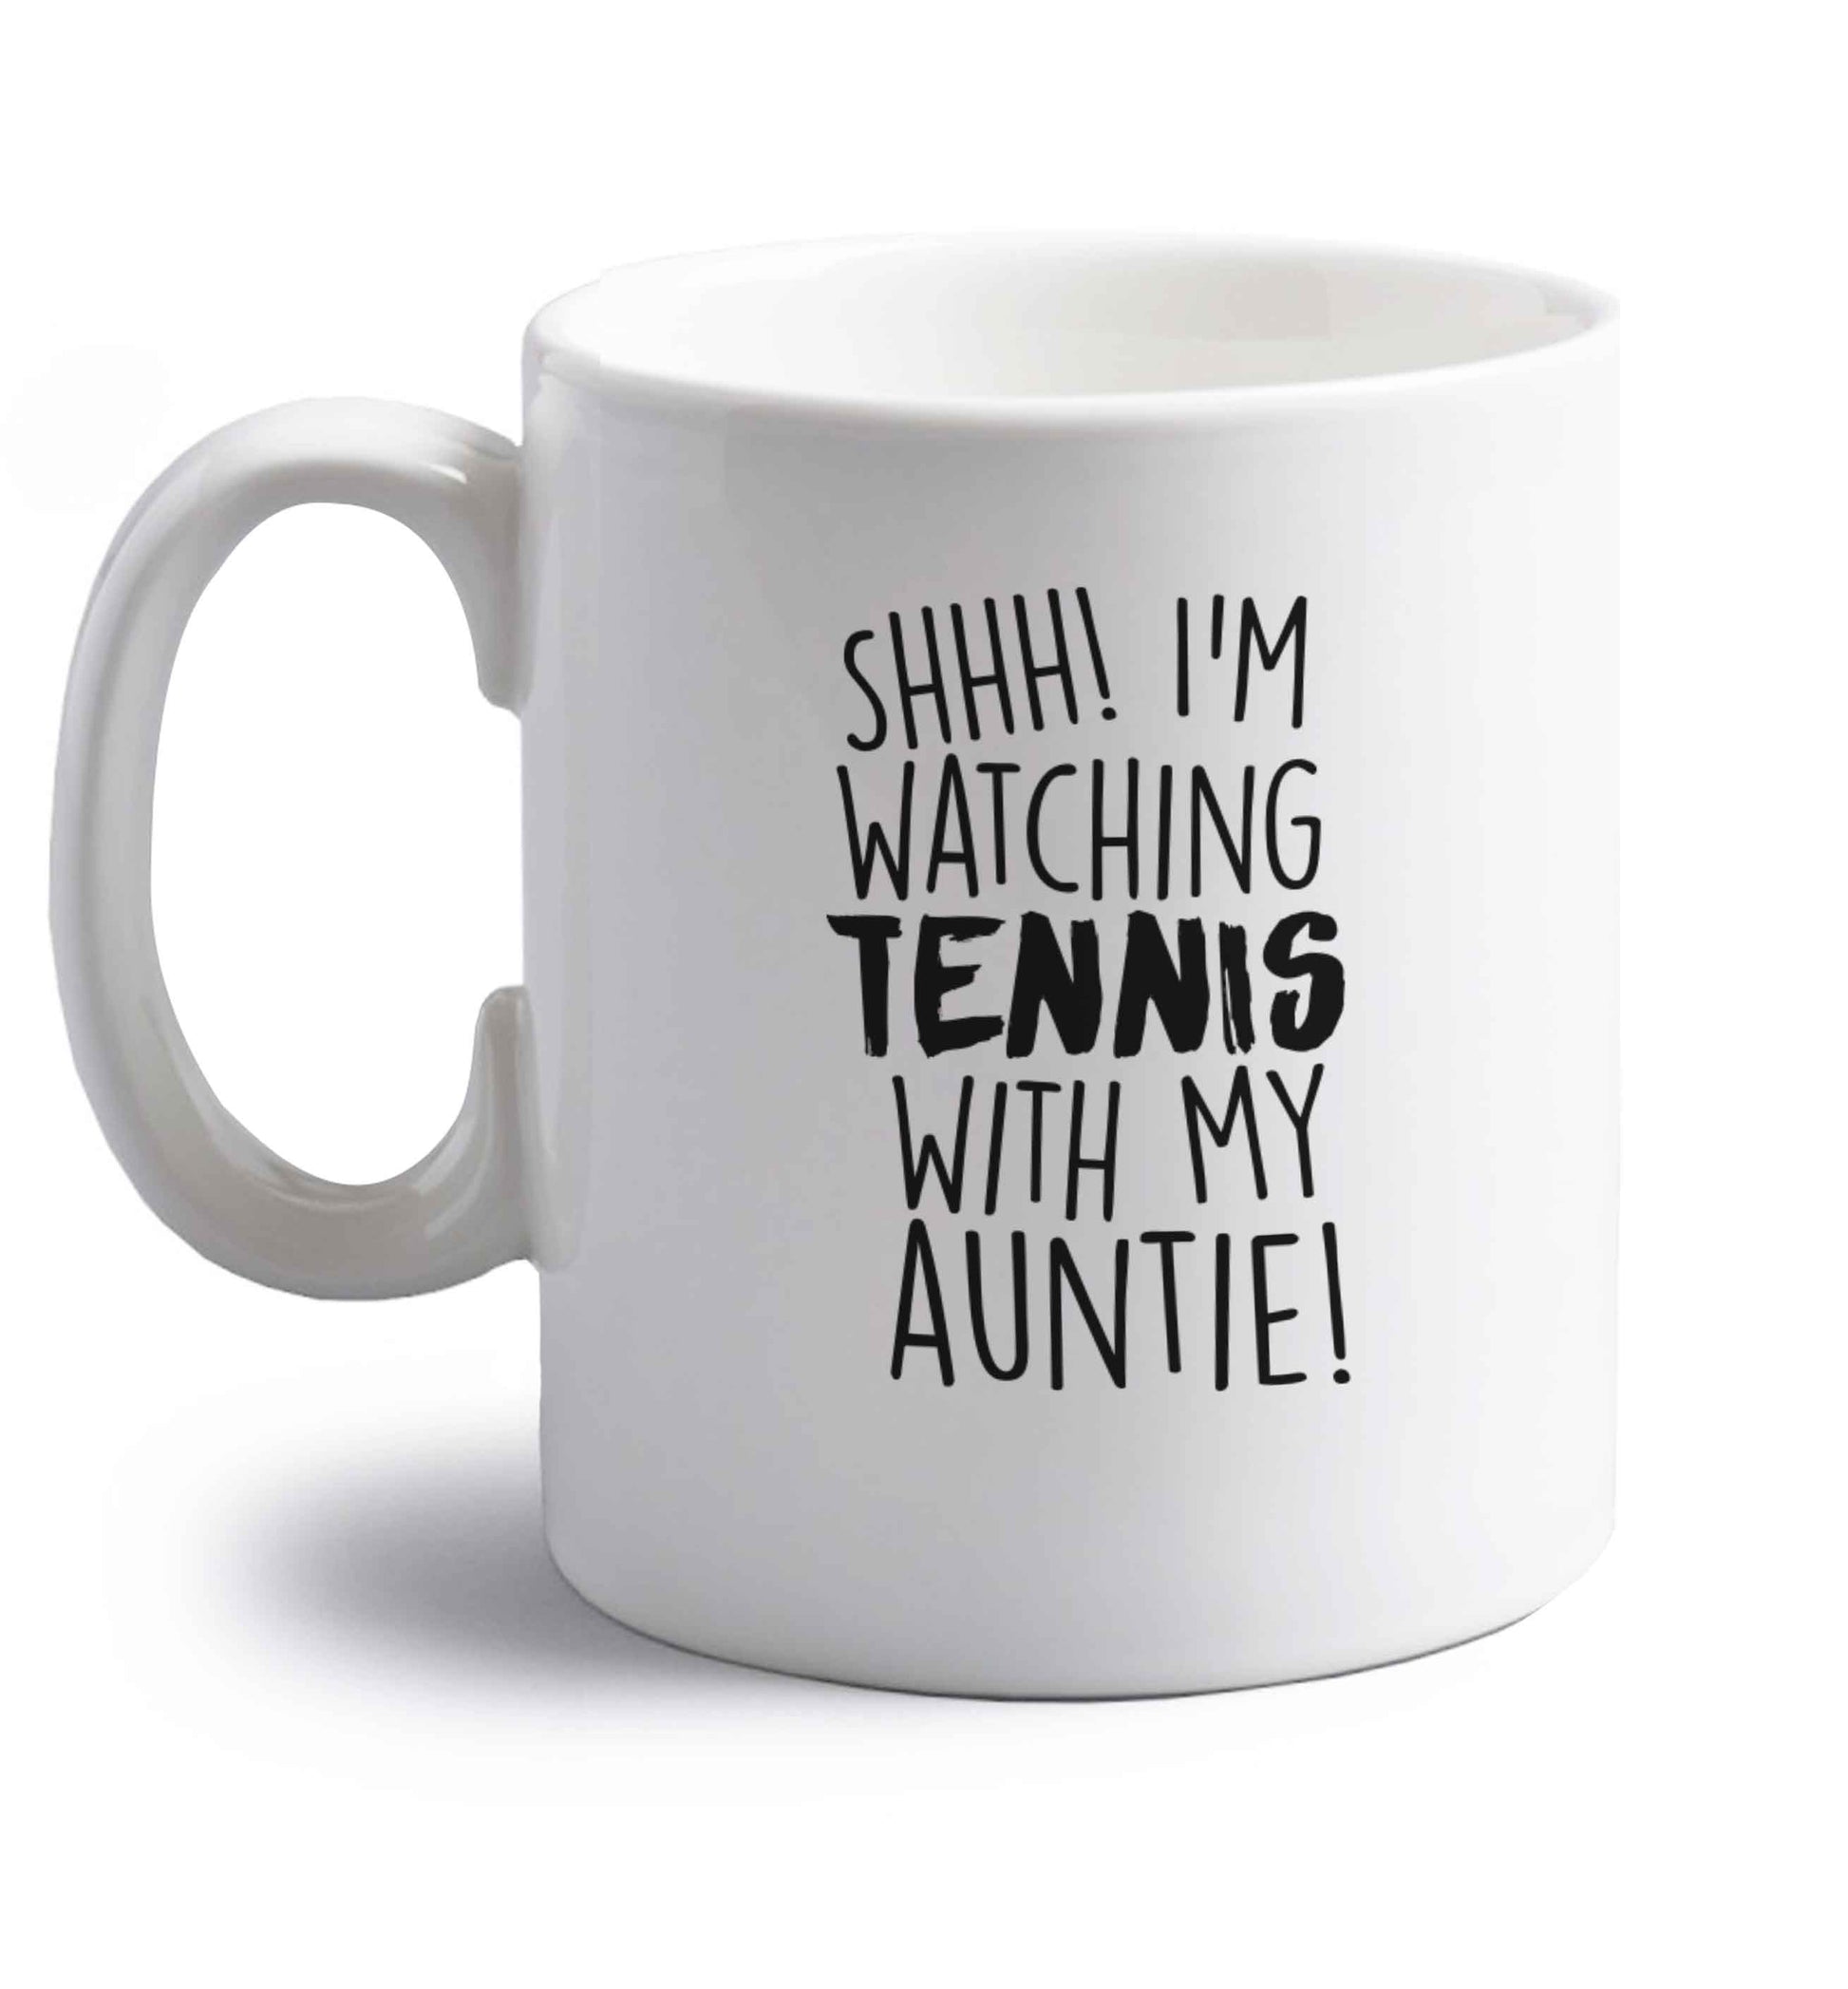 Shh! I'm watching tennis with my auntie! right handed white ceramic mug 